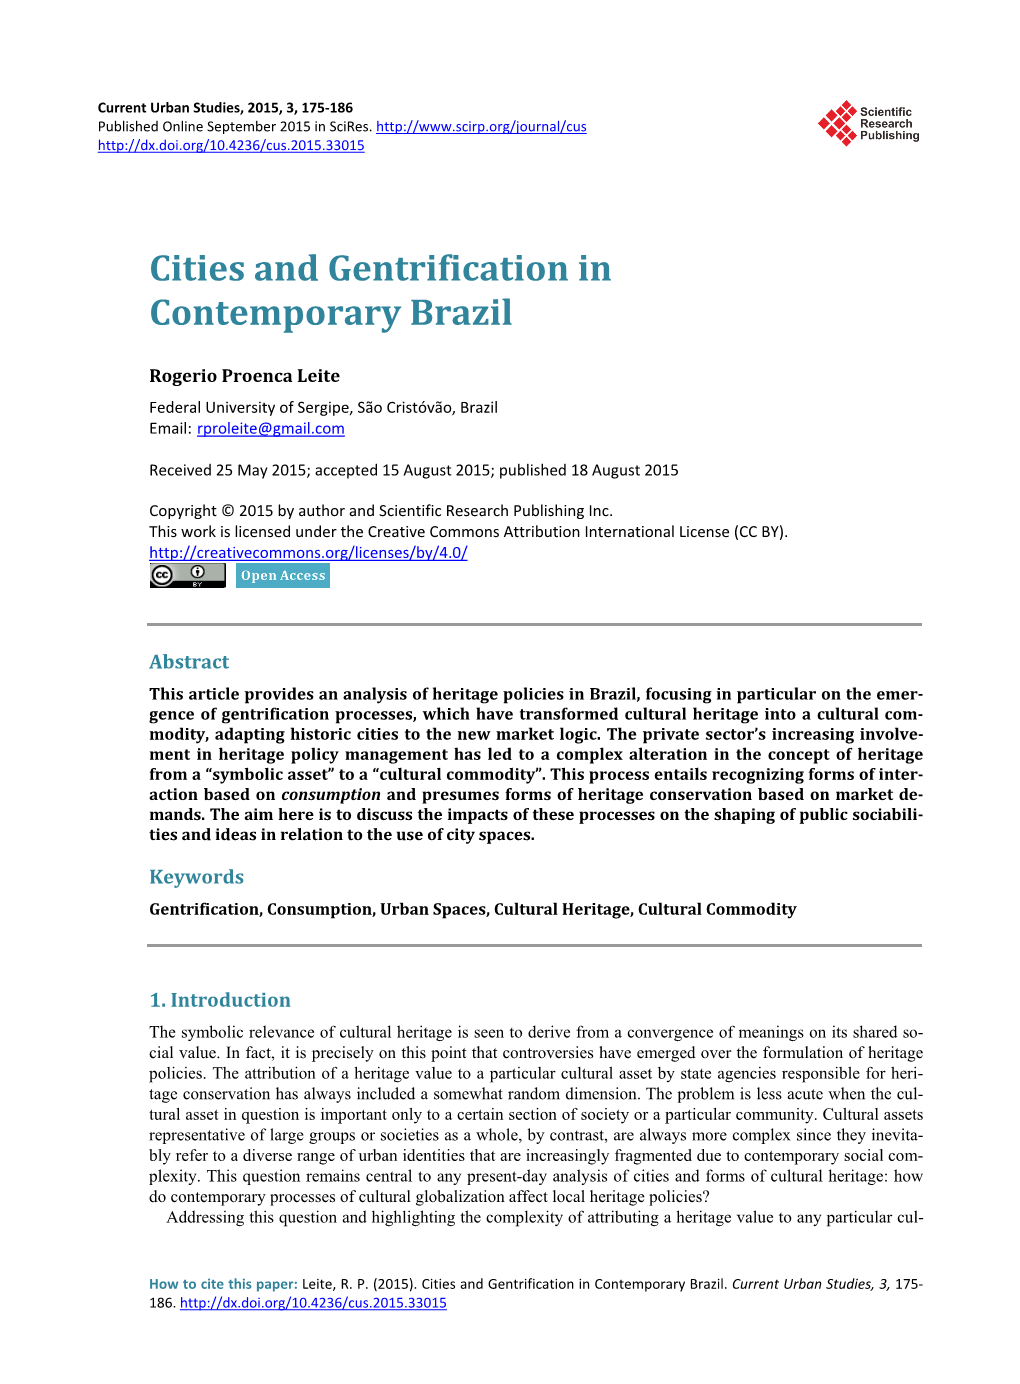 Cities and Gentrification in Contemporary Brazil